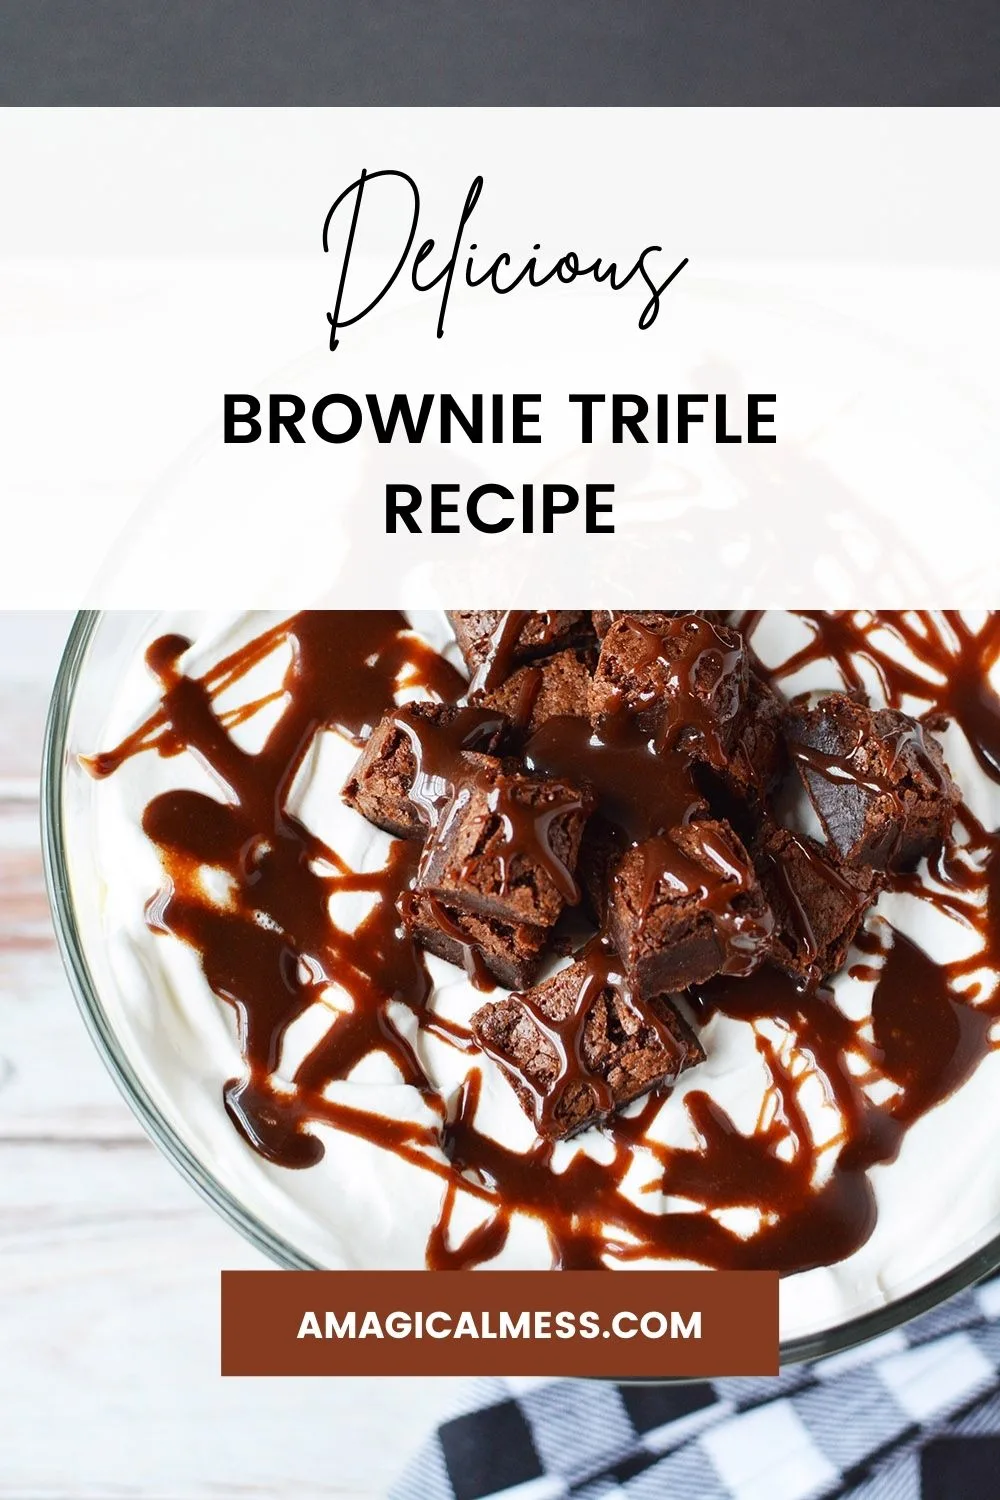 Top of a brownie trifle with hot fudge.